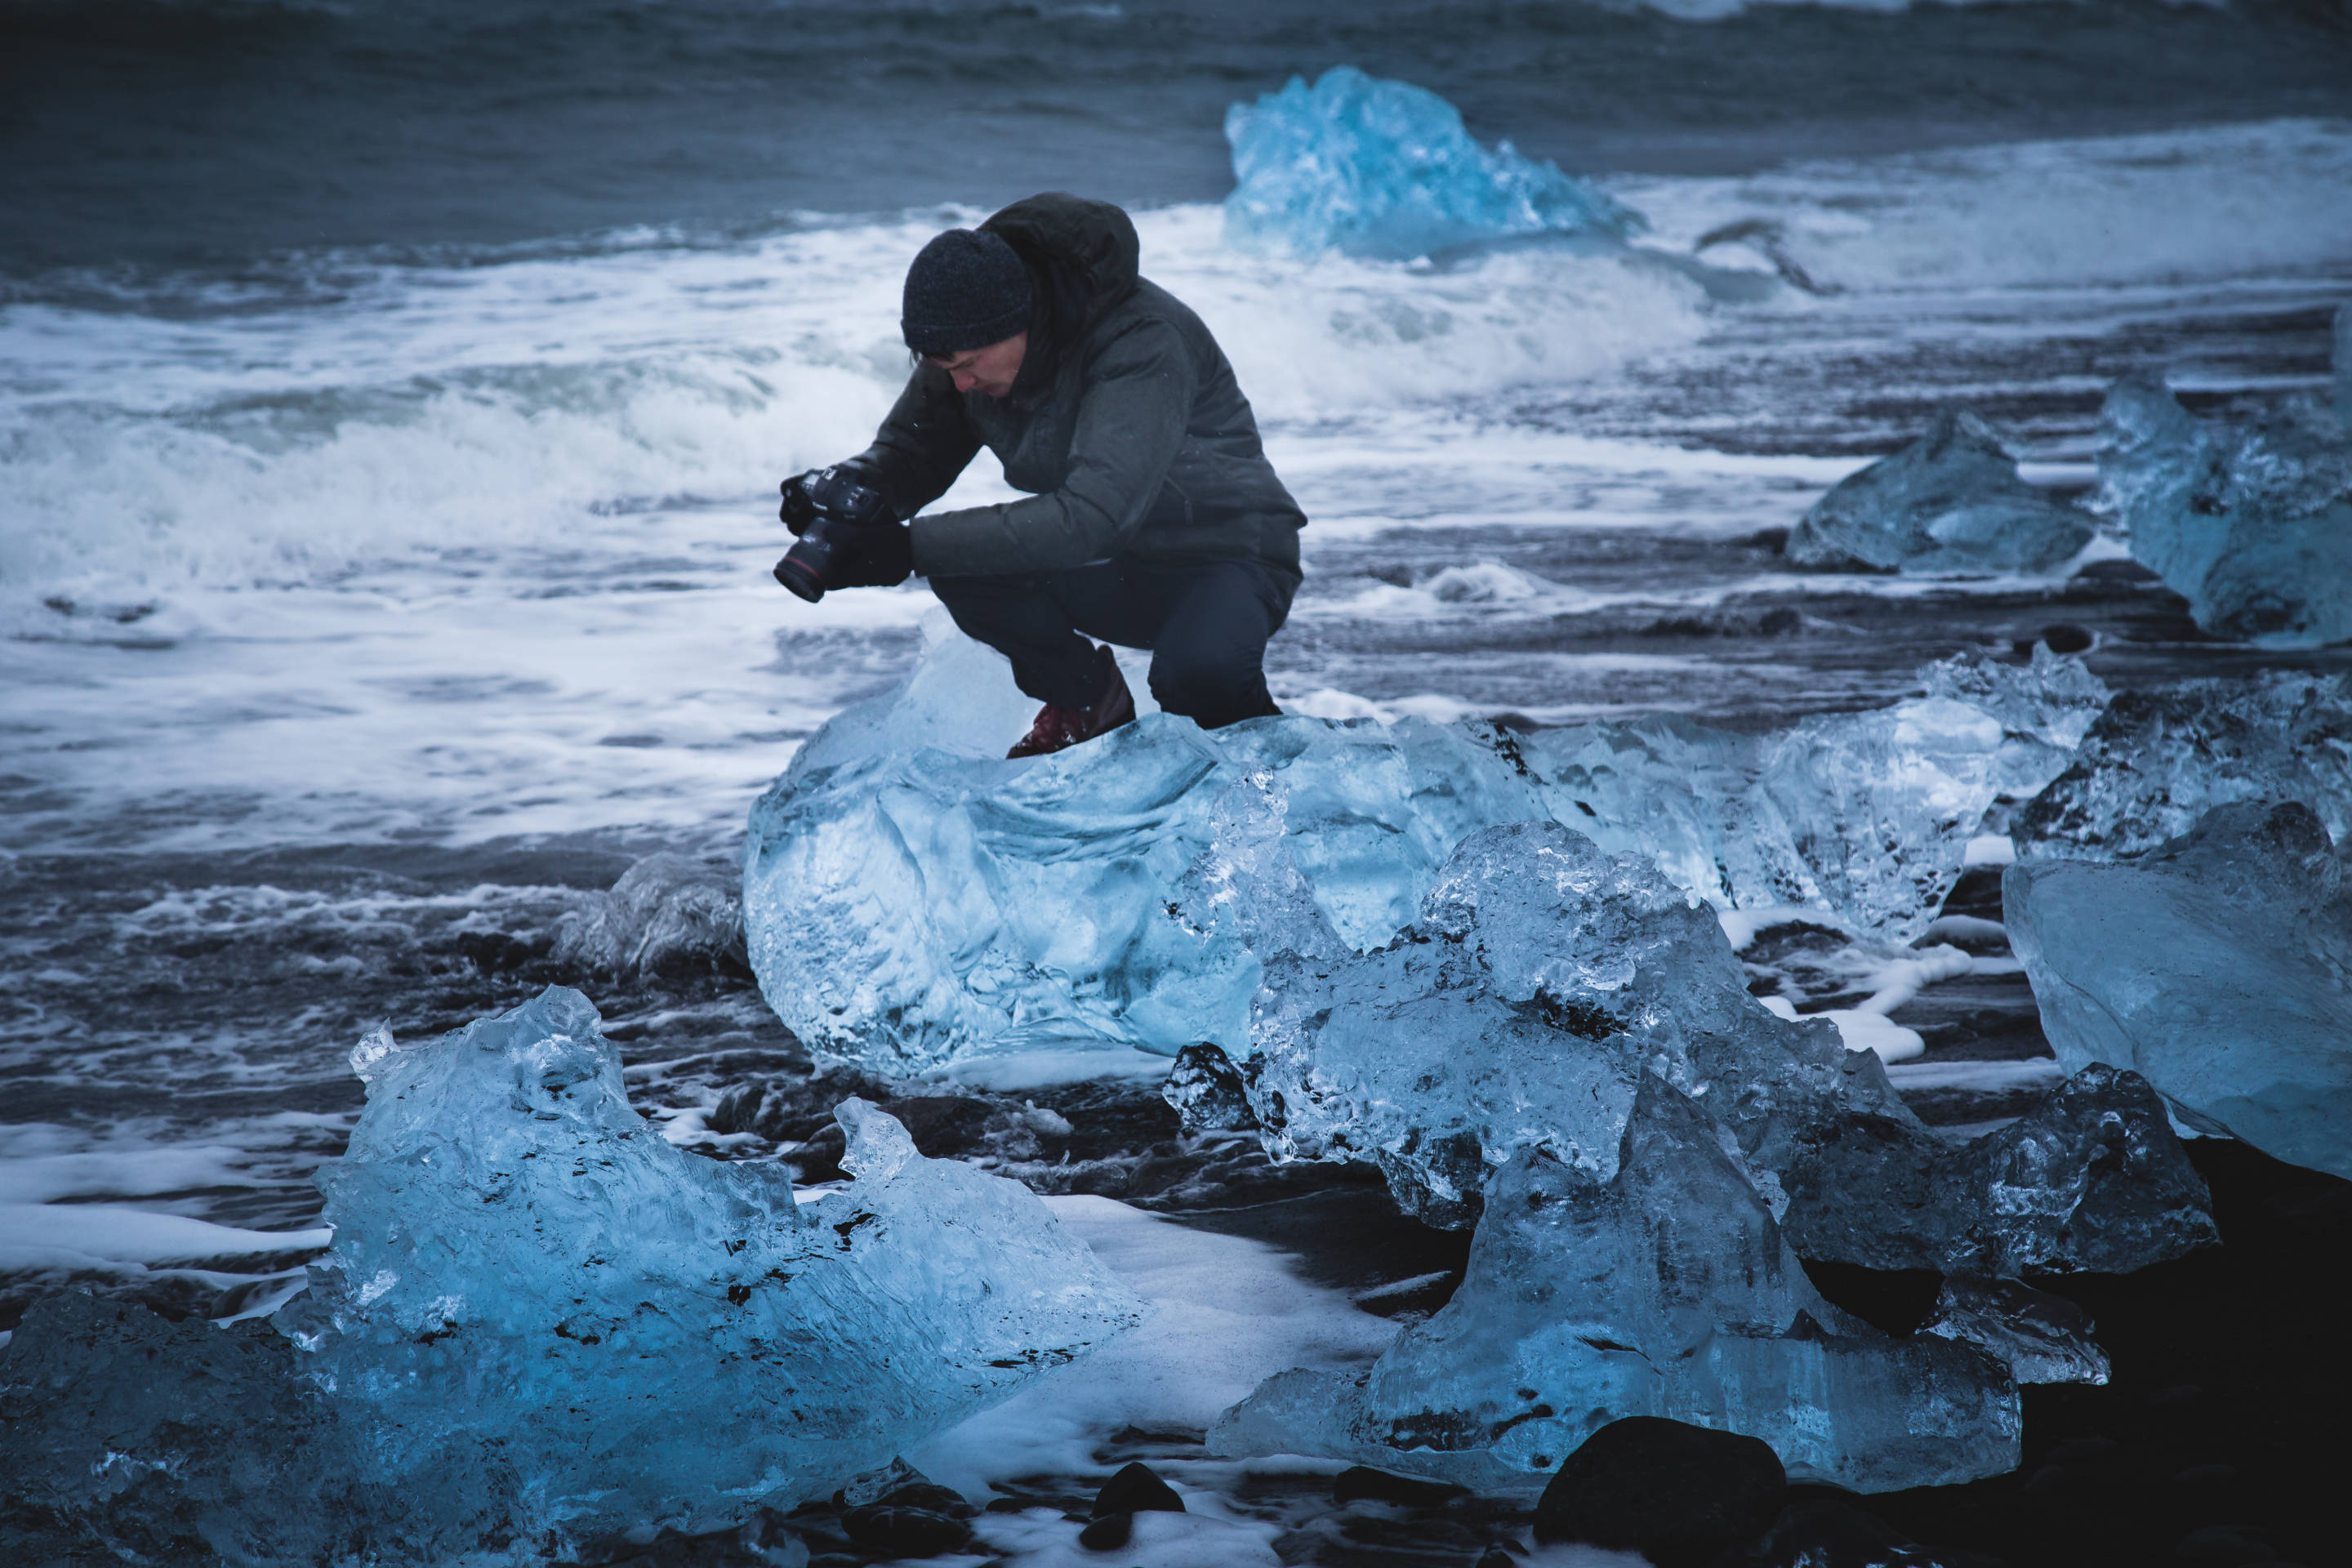 Behind the scenes of landscape photographer Andrew Studer at Diamond Beach in Iceland Photo by Hanna Roshak